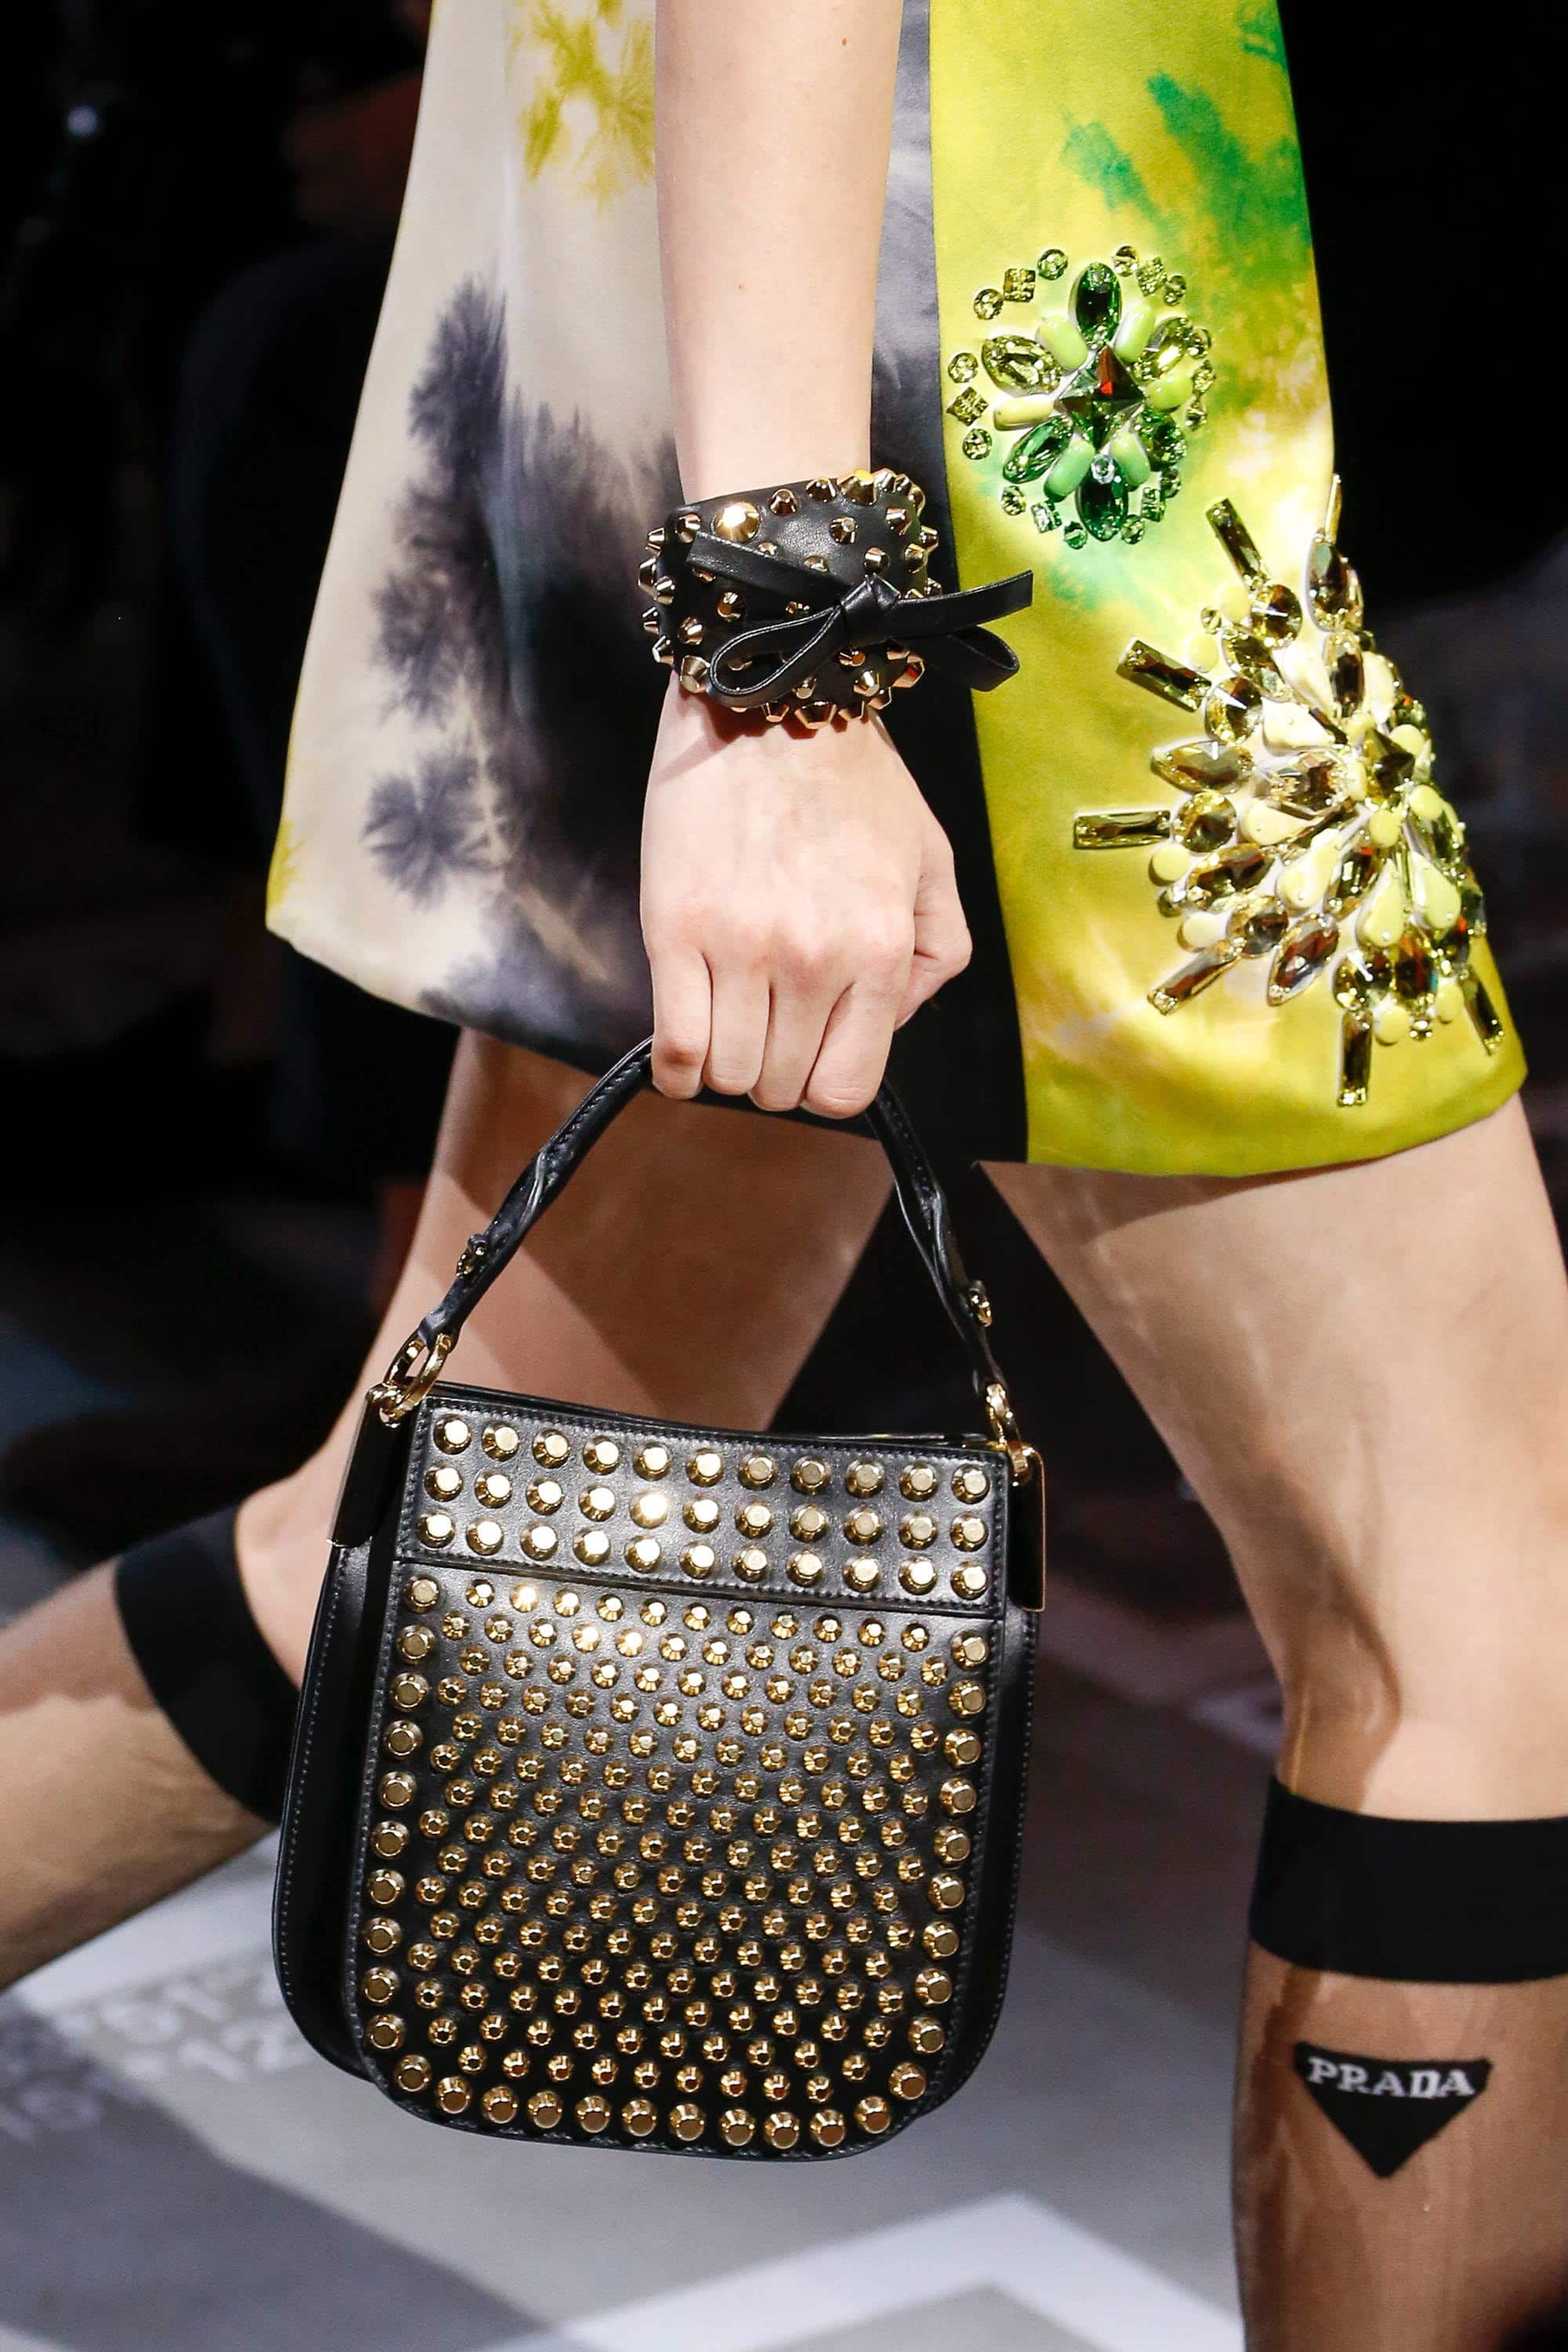 Prada Spring/Summer 2019 Runway Bag Collection | Spotted Fashion